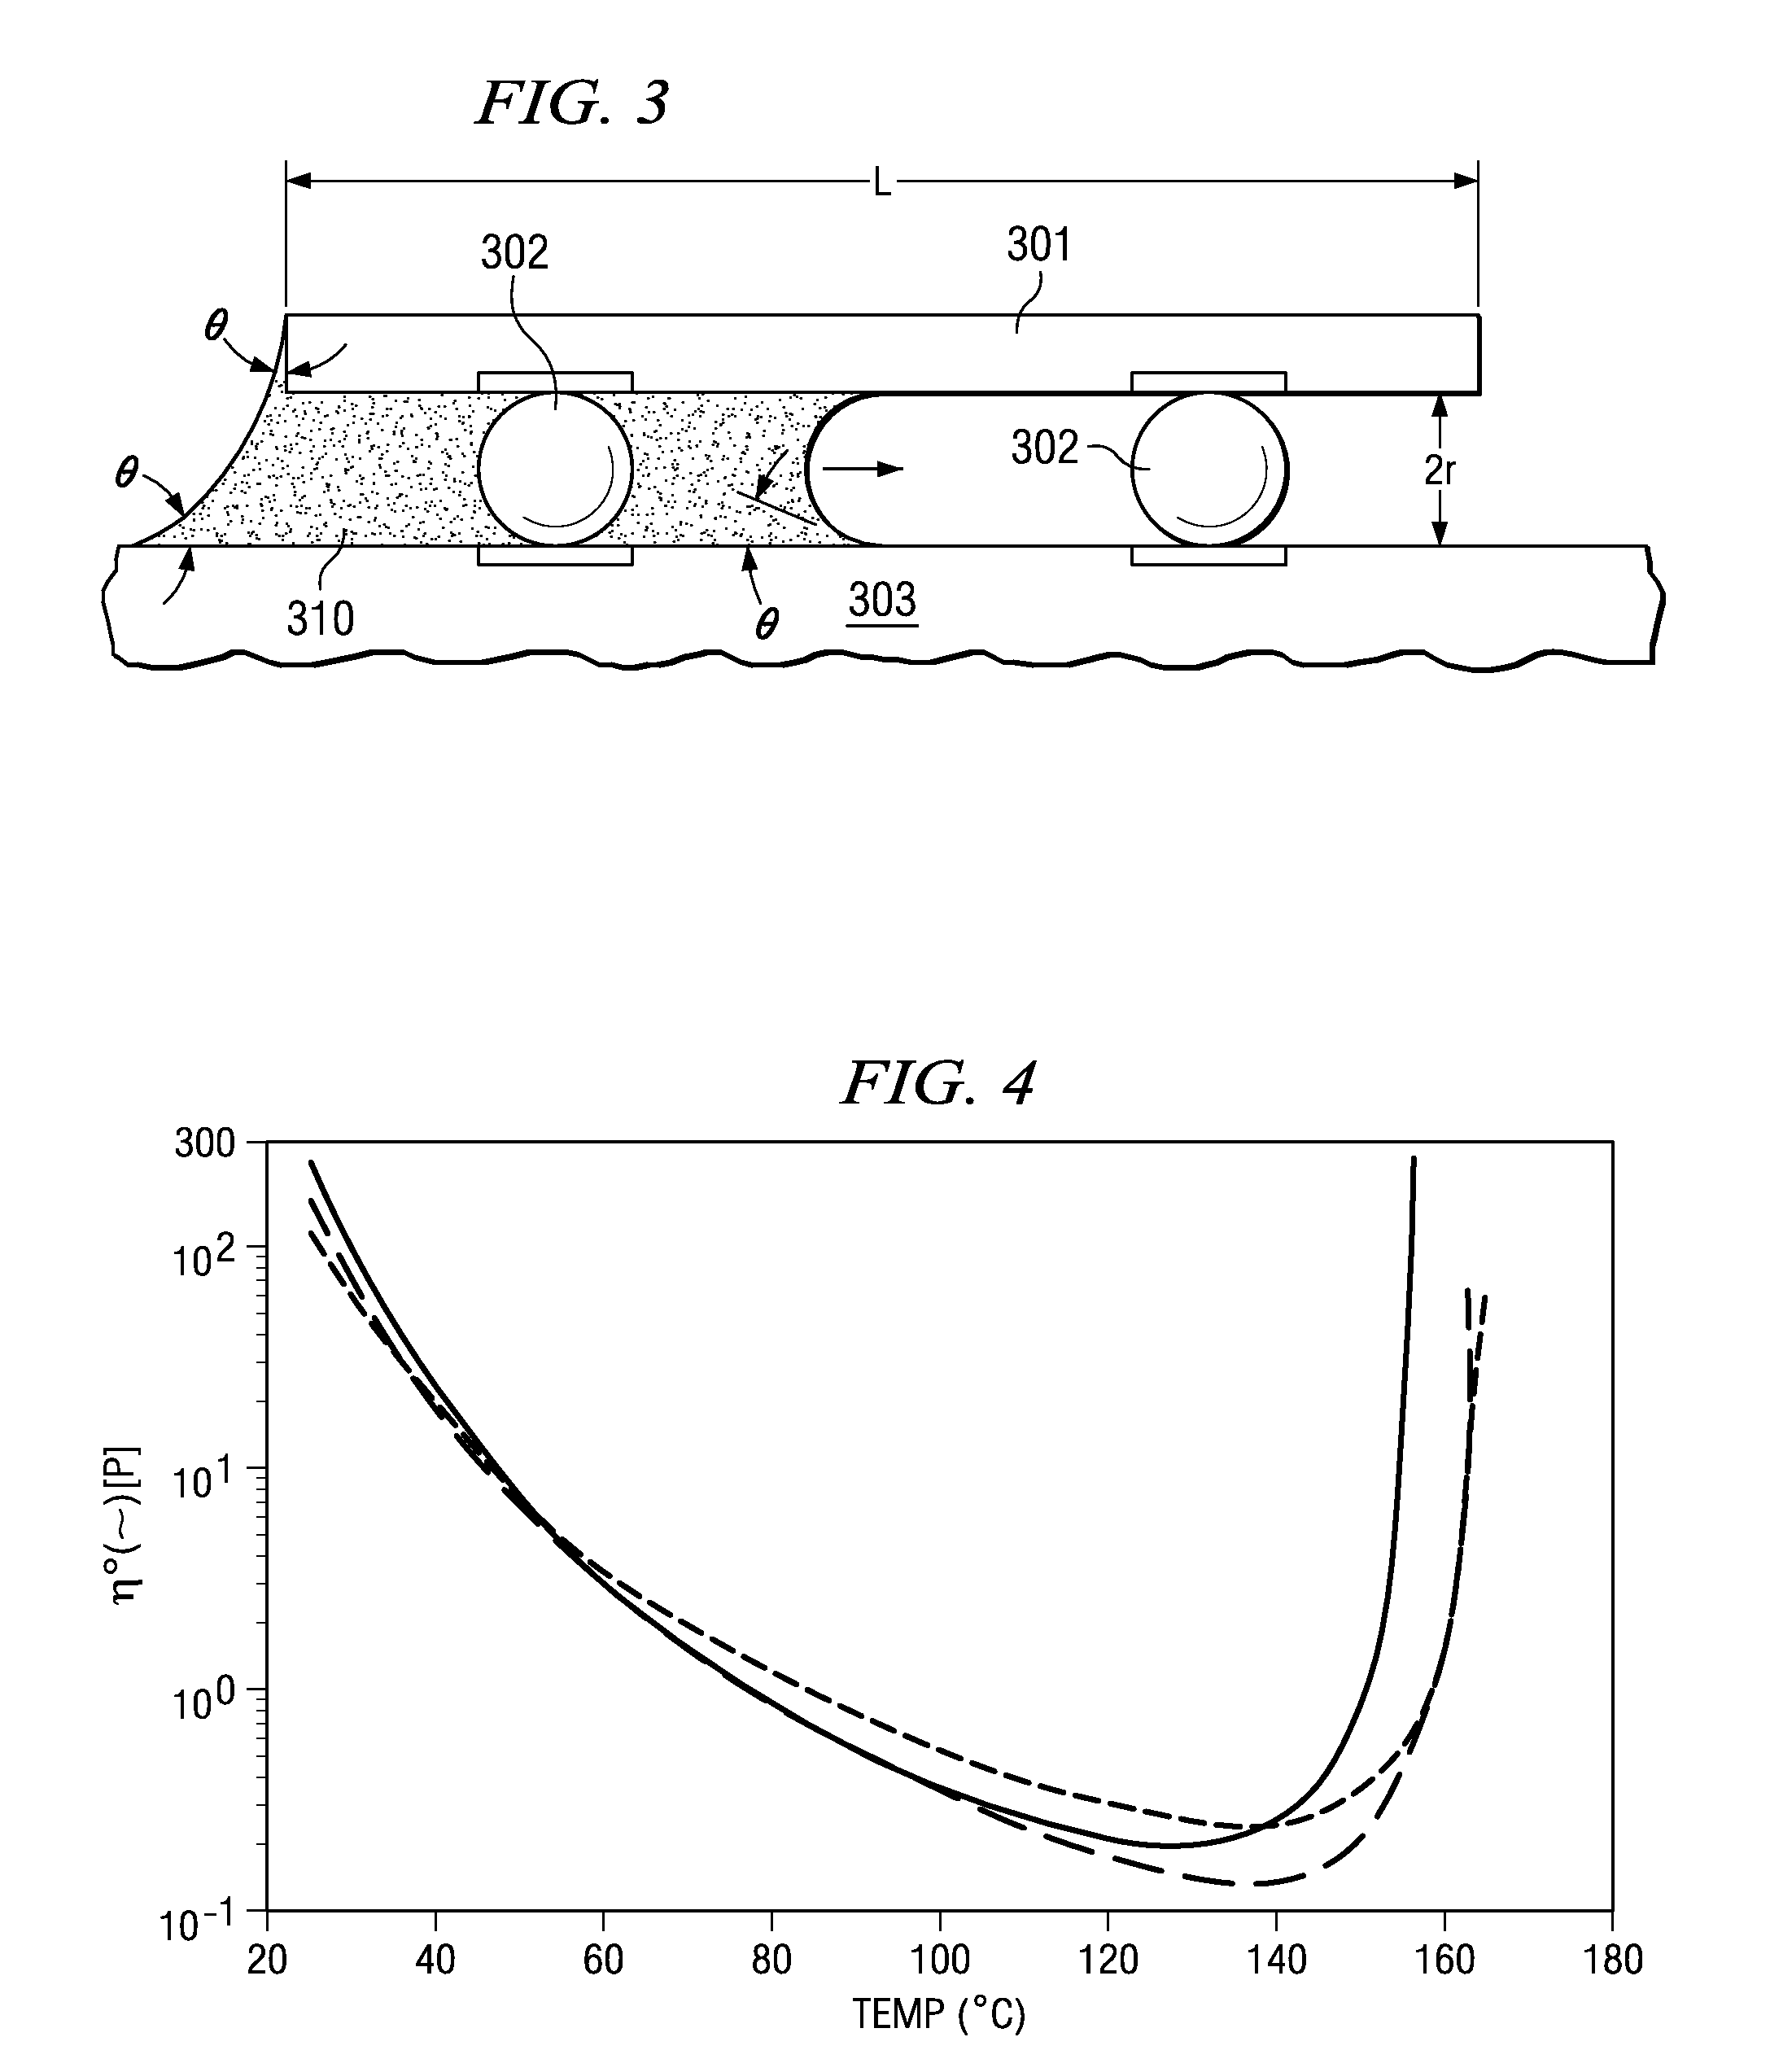 Thermal method to control underfill flow in semiconductor devices